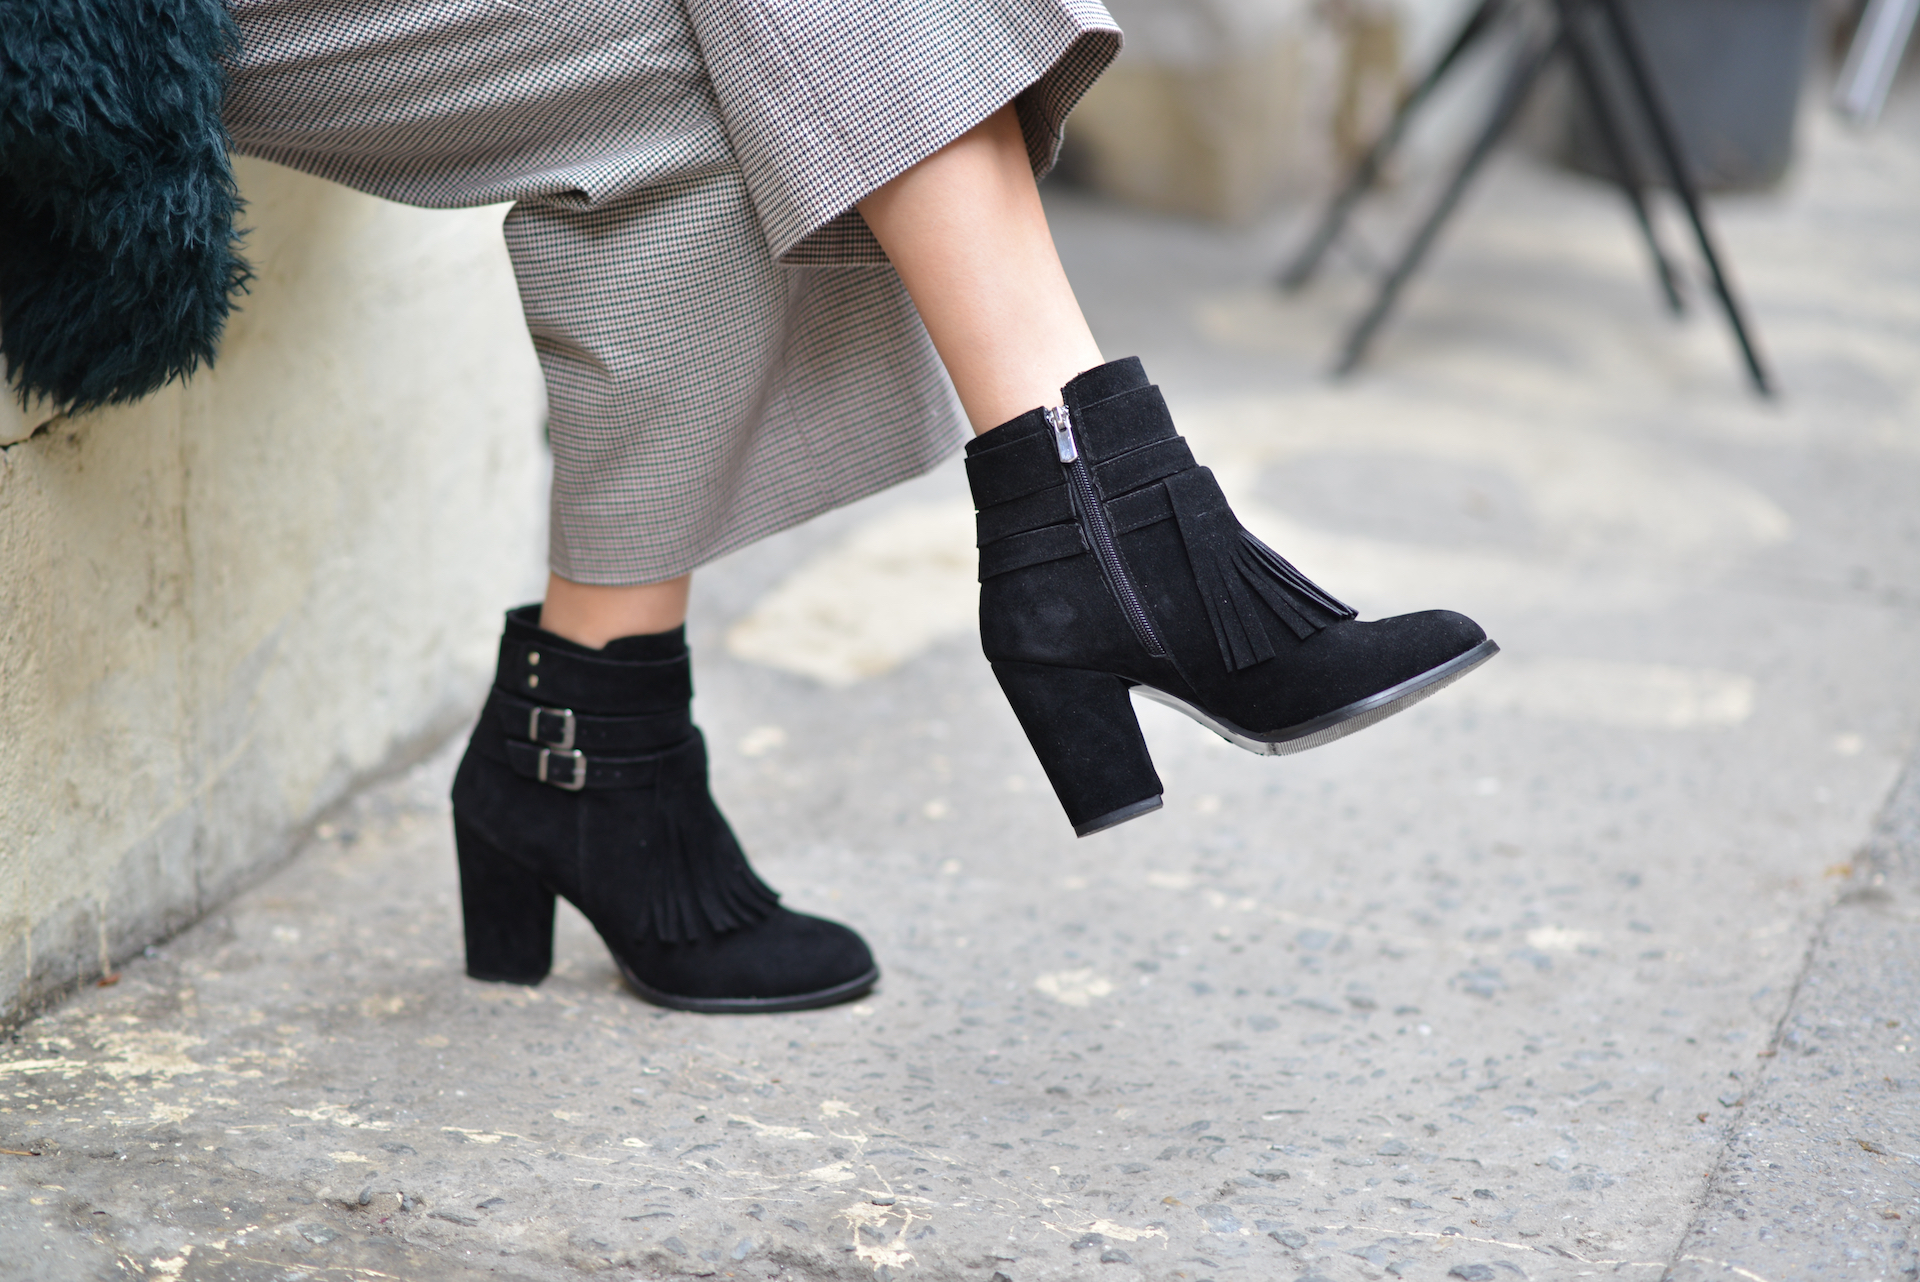 A pair of black boots for the ankle boots for fall blog from Manzanilla Sophia the best dry eye solution